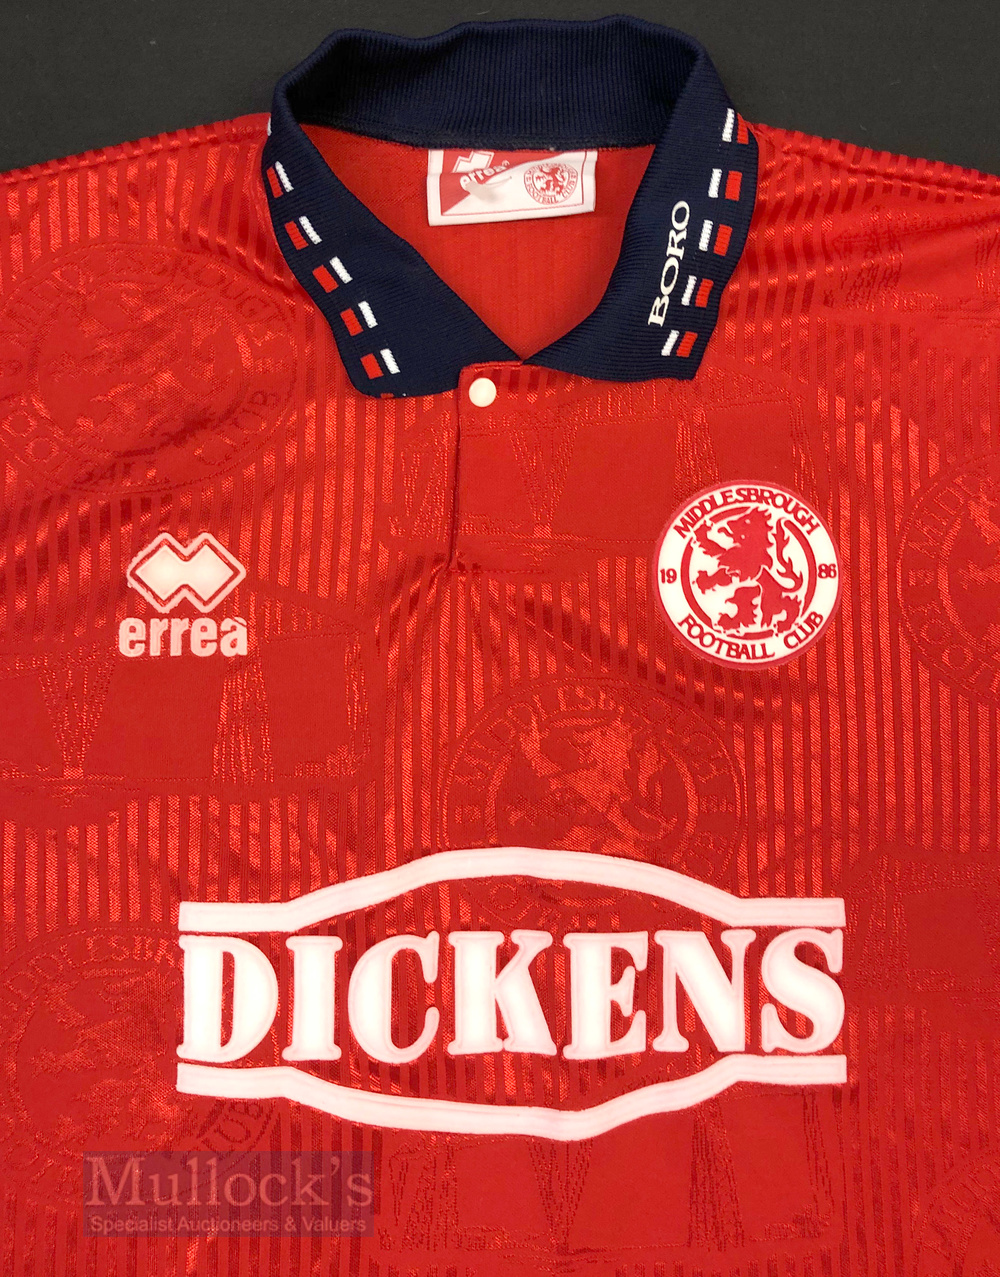 1994/95 Middlesbrough Home football shirt size medium, in red, Errea, short sleeve - Image 2 of 2